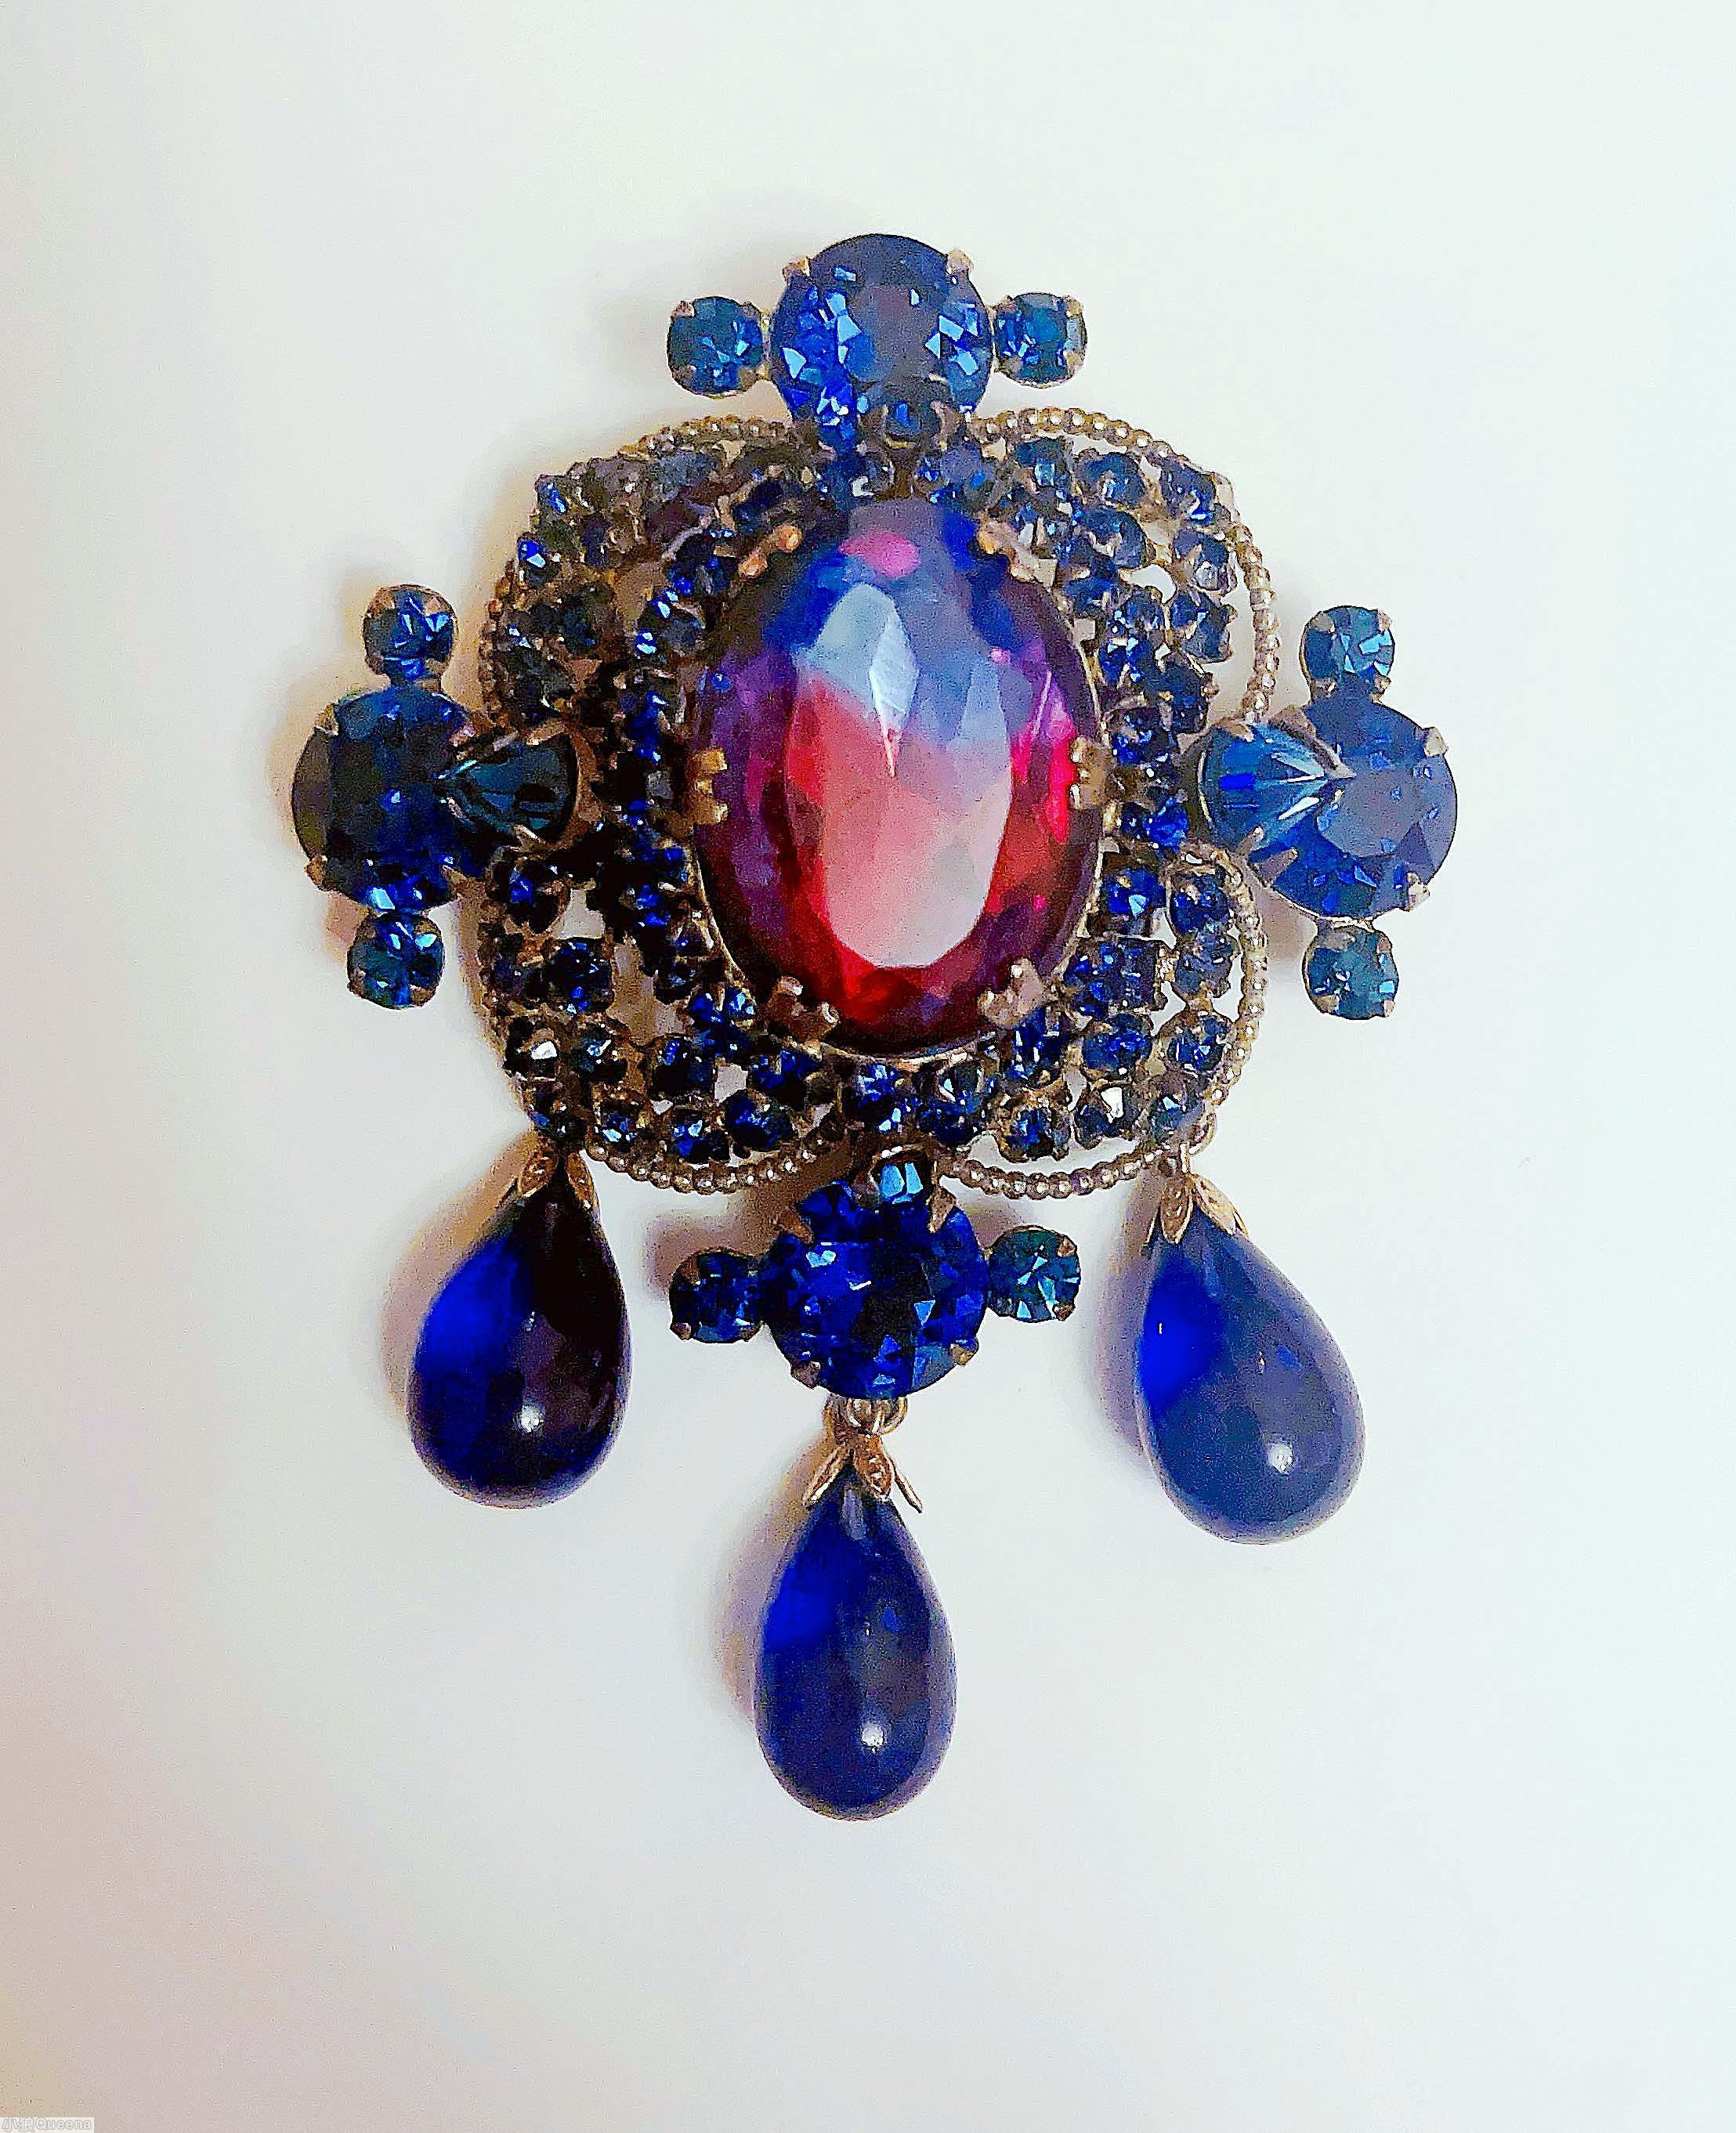 Schreiner 3 dangle top down pin large oval cab center top surrounding 3 round small stone in 4 wired pedal 4 large chaton large bicolor ruby navy faceted oval stone center royal blue goldtone jewelry